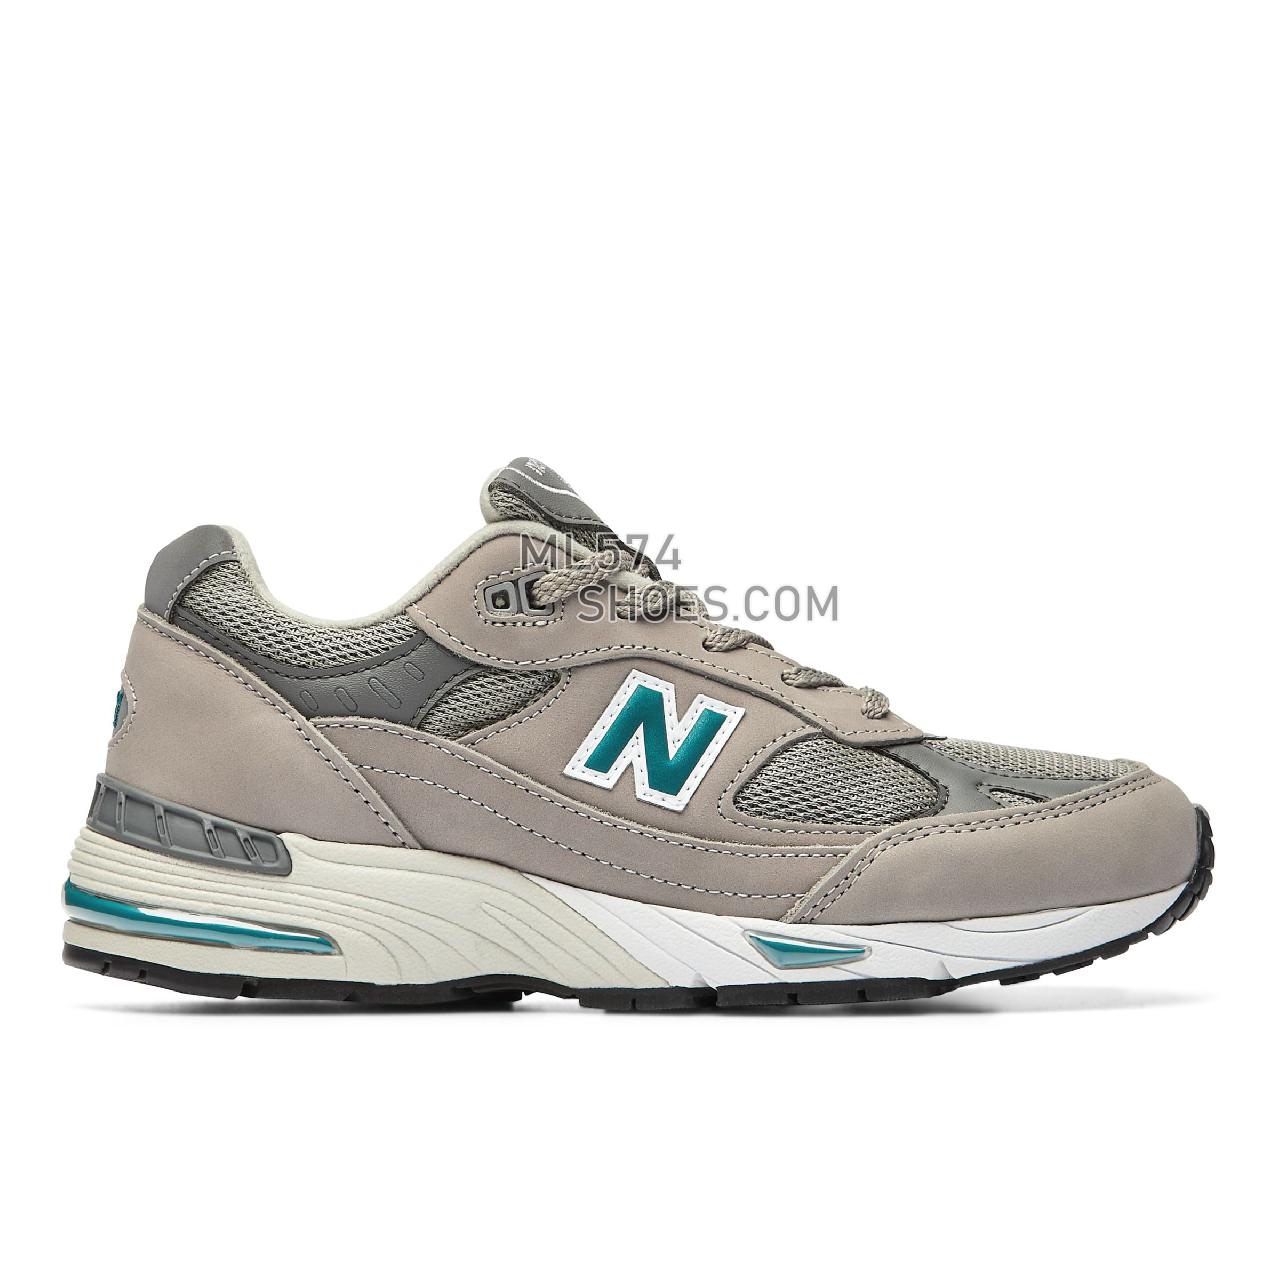 New Balance Made in UK 991 - Women's Made in USA And UK Sneakers - Grey with Emerald and White - W991ANI